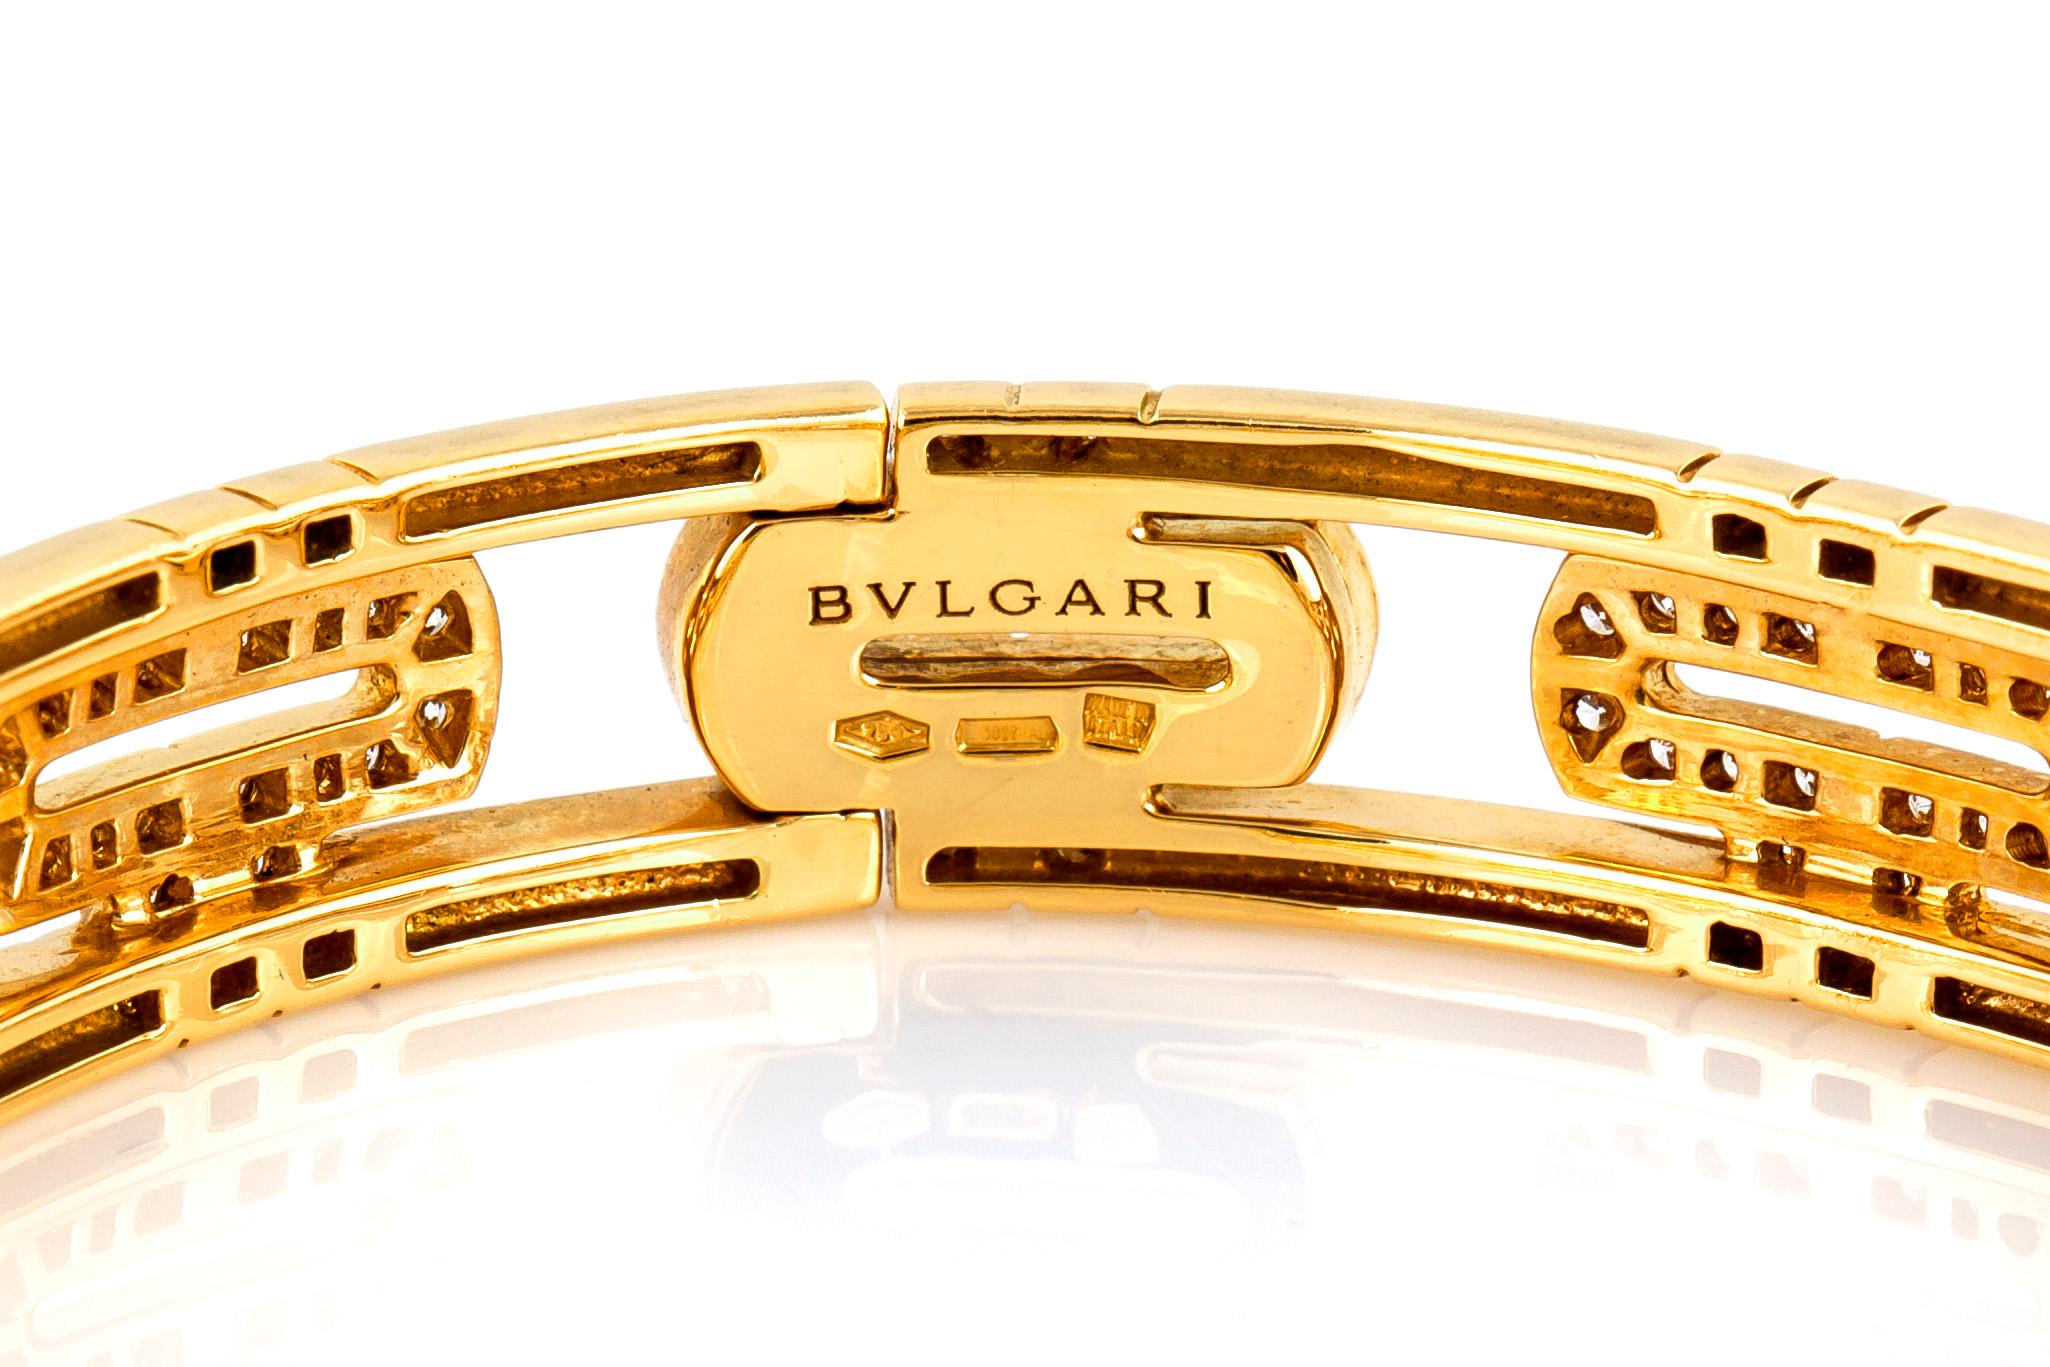 Bvlgari Parentesi bangle bracelet, finely crafted in 18 k yellow gold incrusted with brilliant cut diamonds.